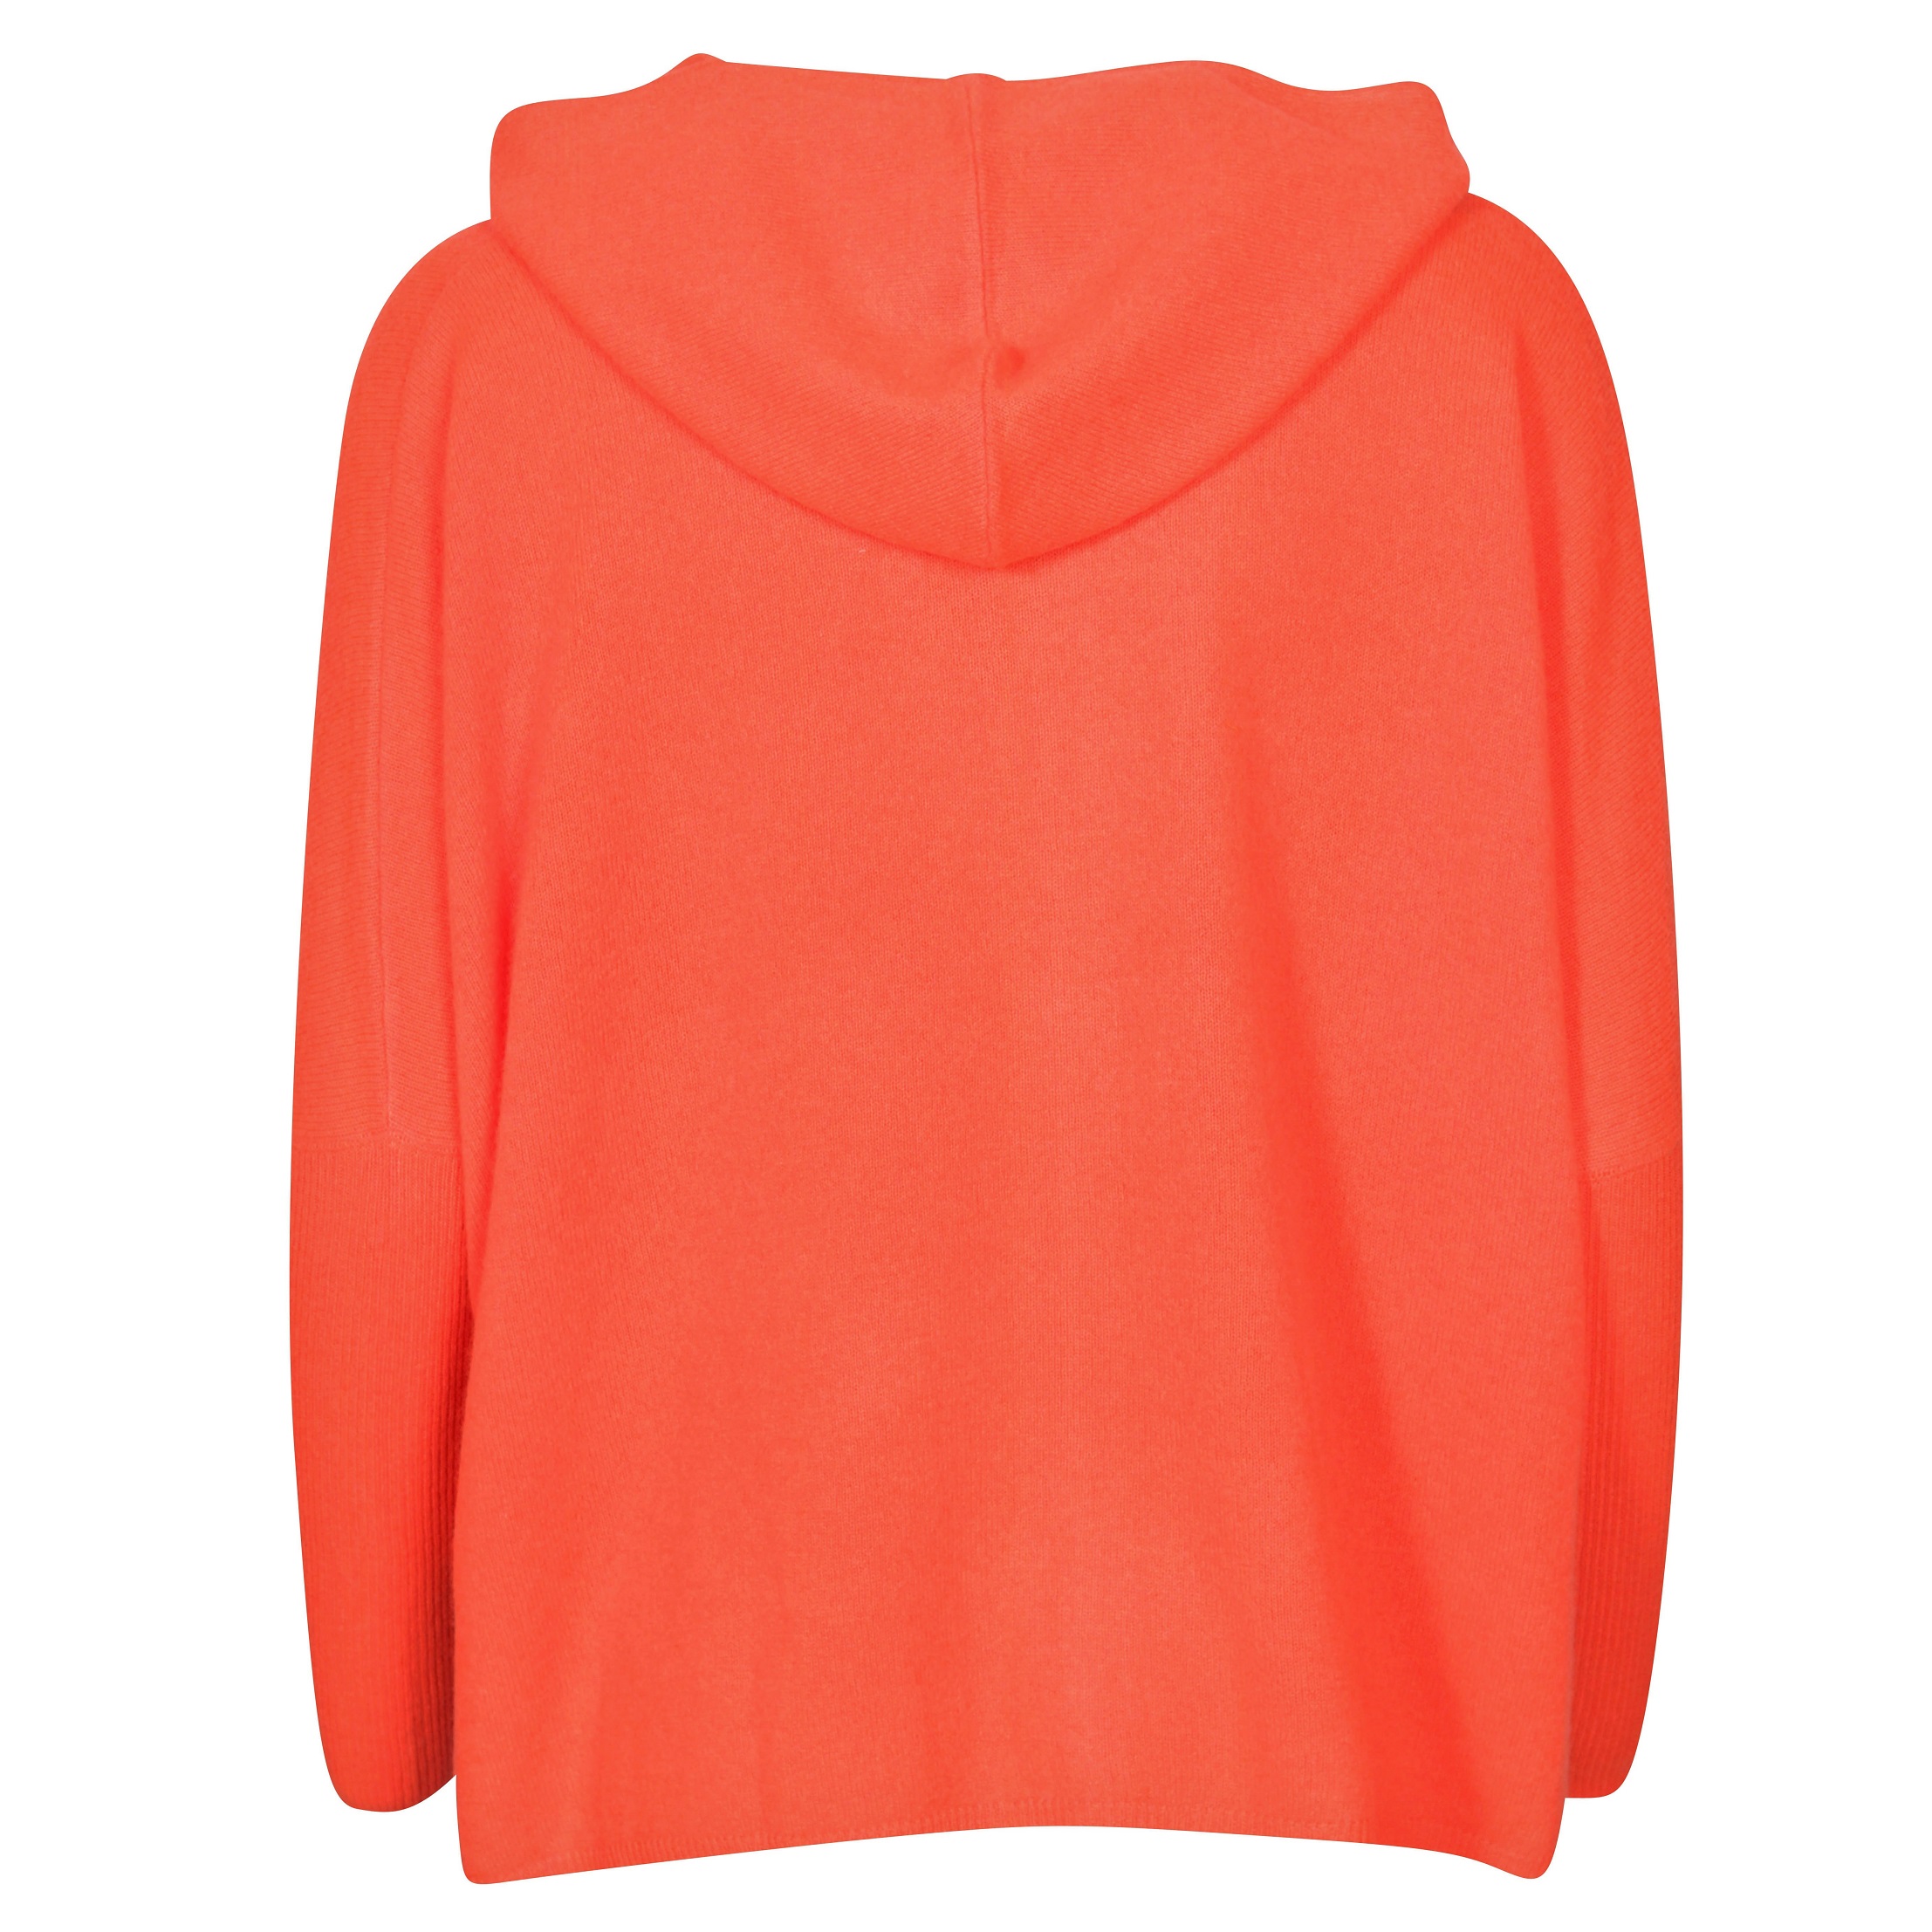 Absolut Cashmere Lilly Zip Hoodie in Corail Fluo S